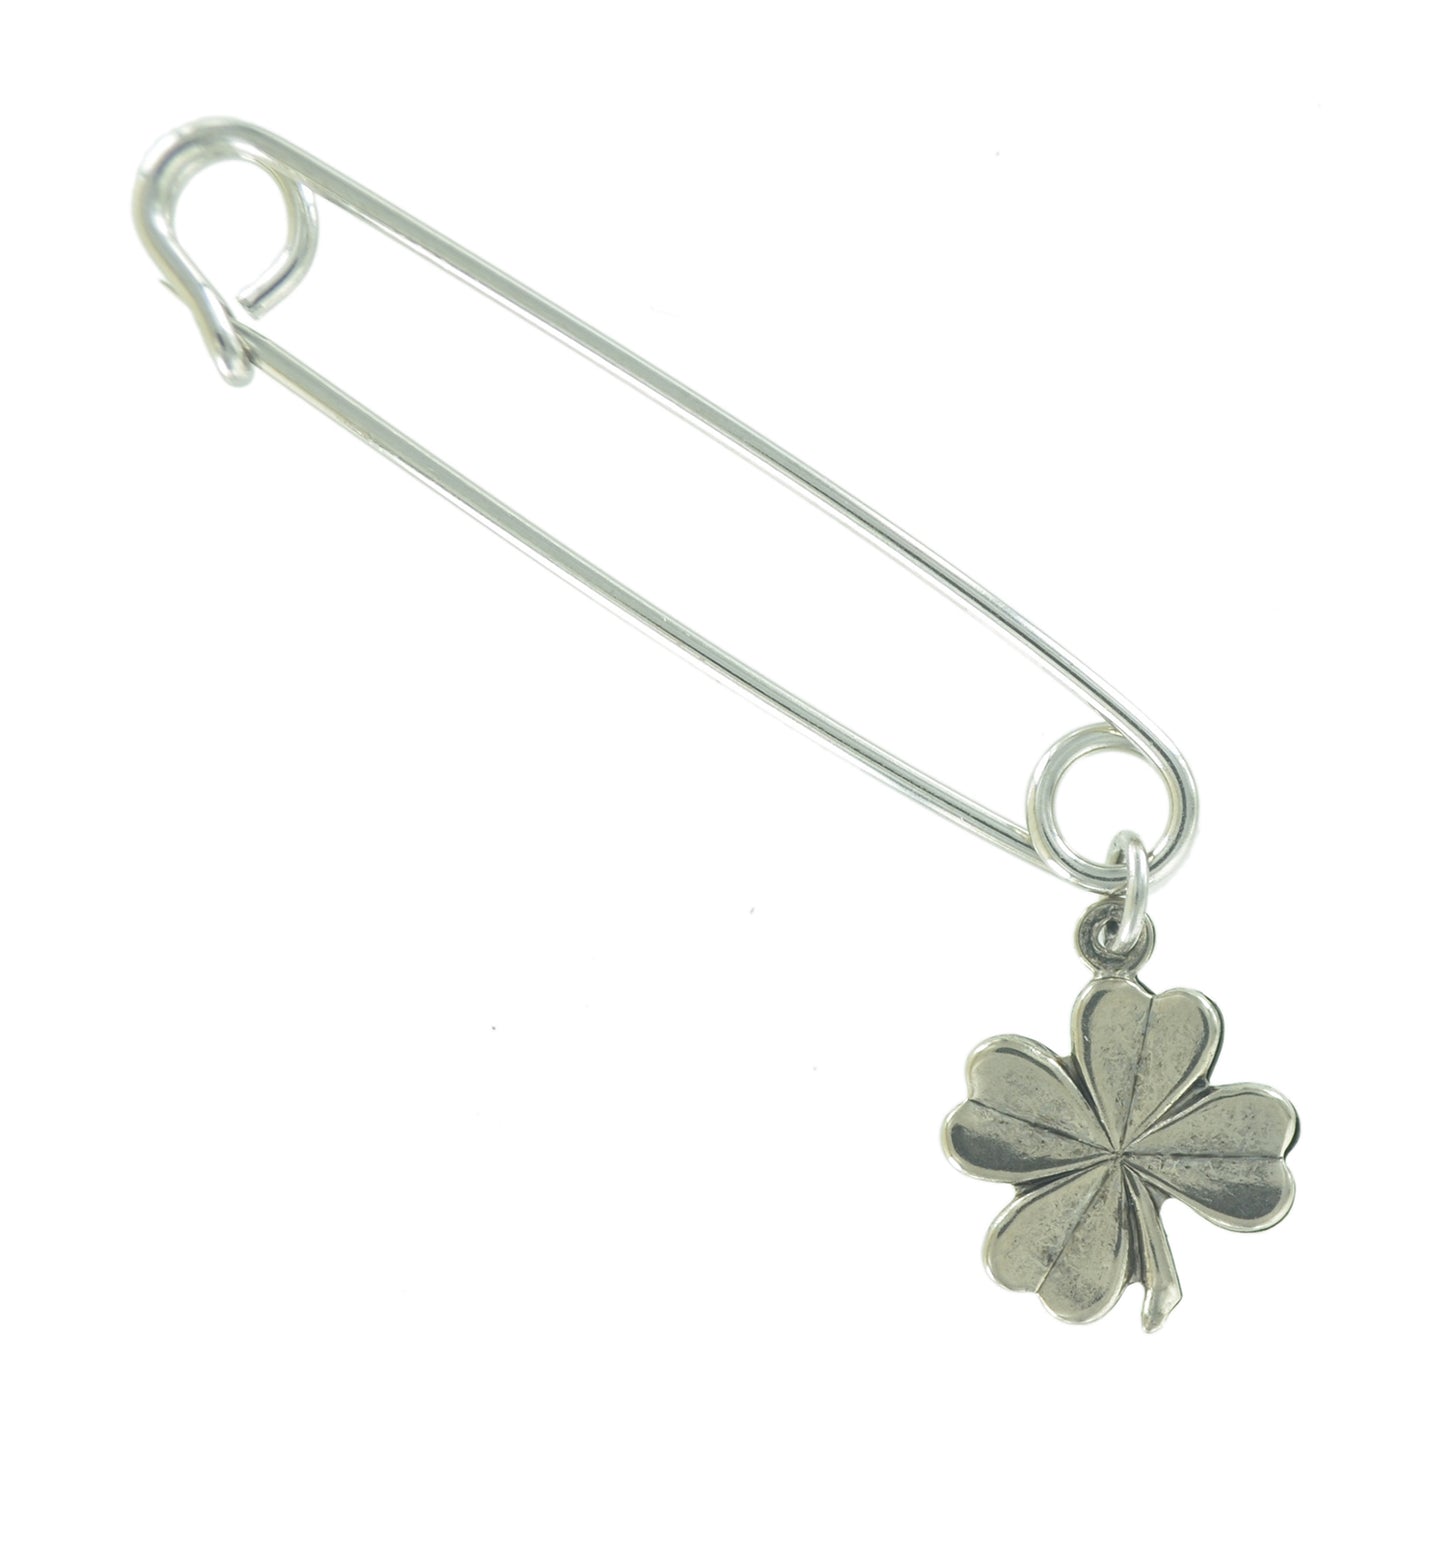 USA Lucky Safety Pin Brooch Four Leaf Clover Good Luck Charm Silver Tone  2"